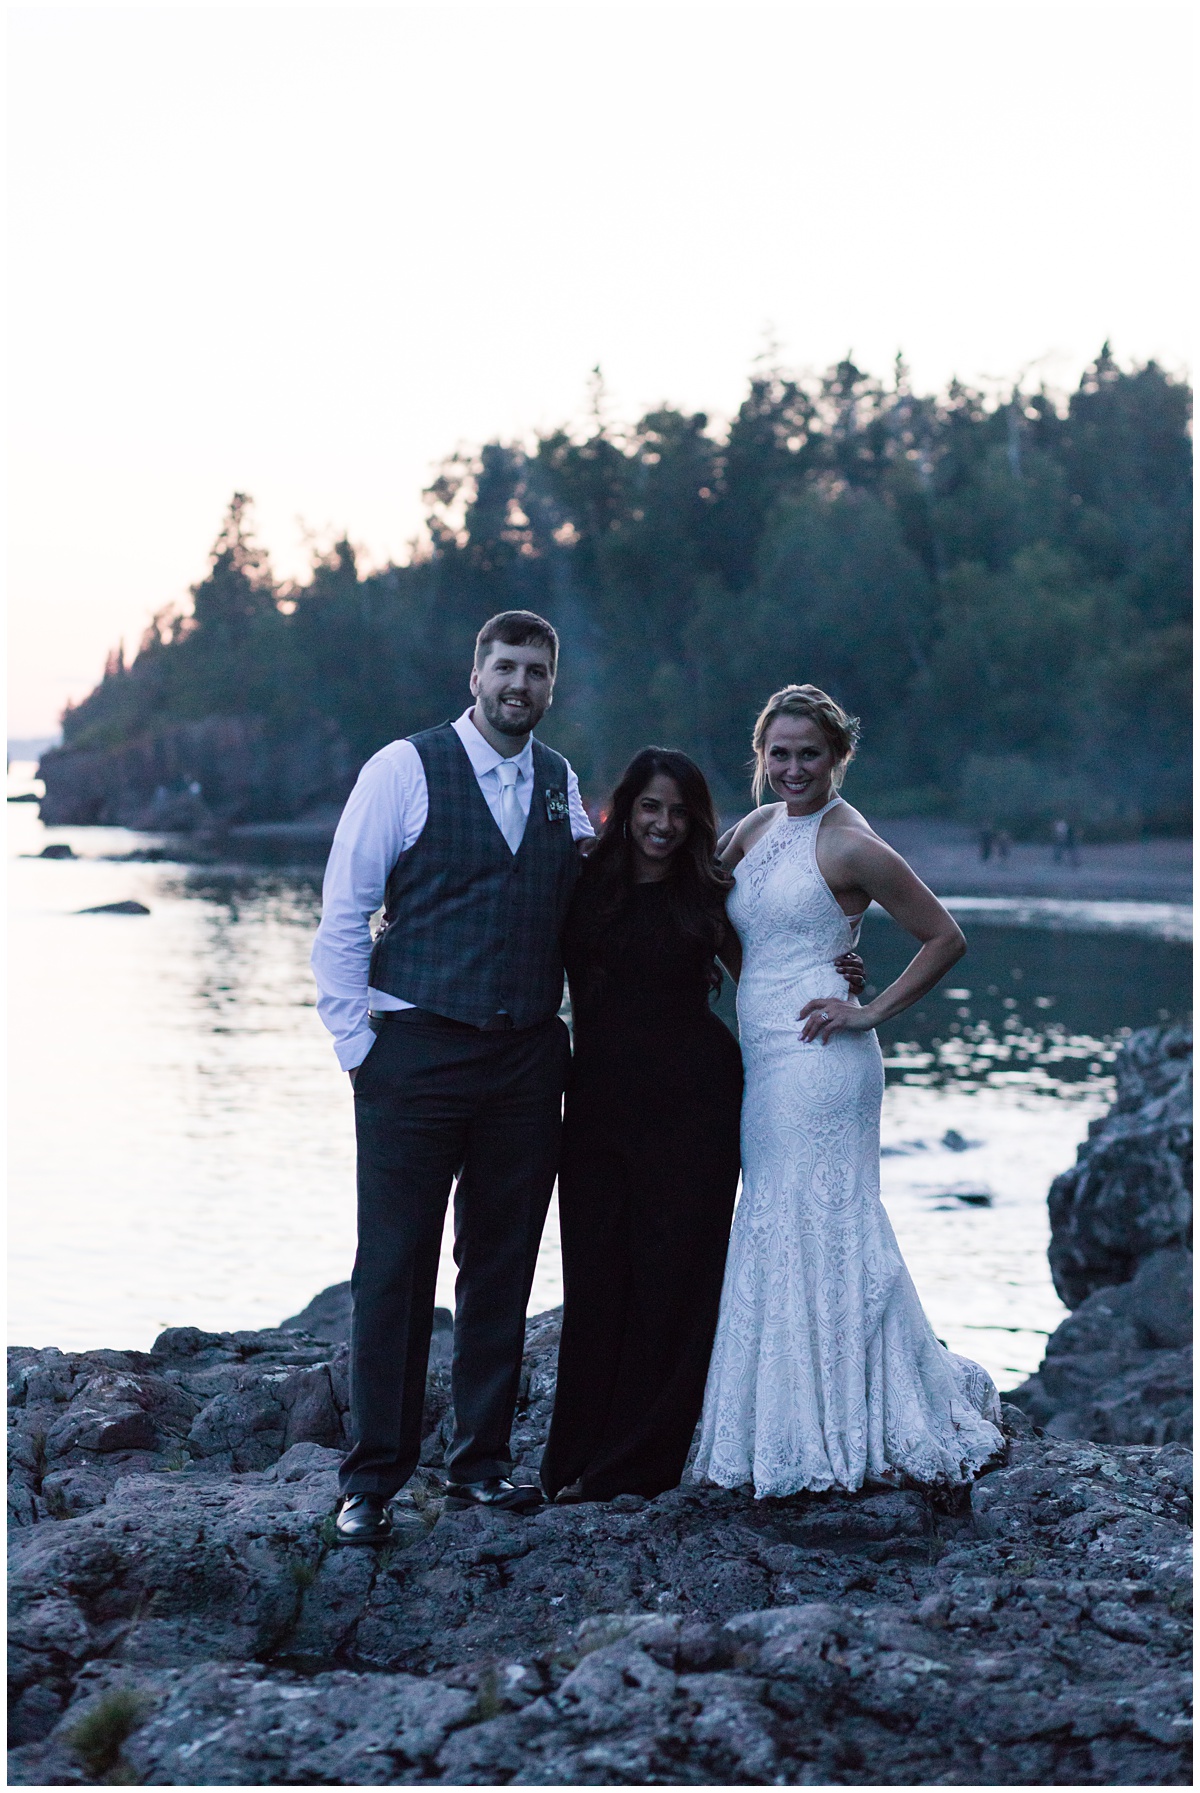 Rohana Olson of Comfort and Cashmere Photography poses for a fun photo with her bride and groom at the end of their wedding day